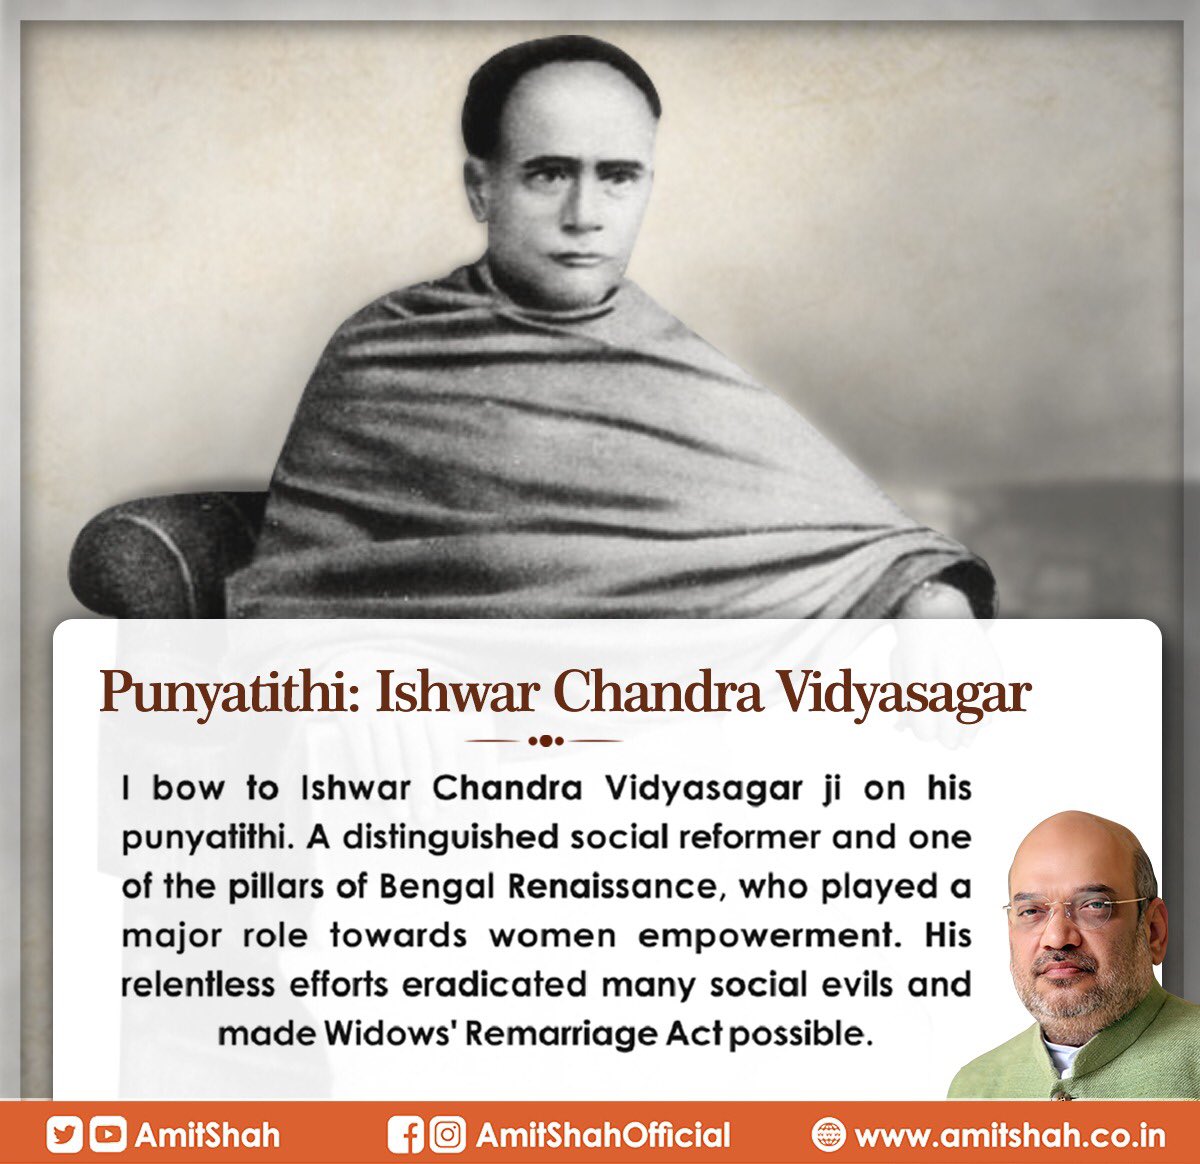 I bow to Ishwar Chandra Vidyasagar ji on his punyatithi. A distinguished social reformer and one of the pillars of Bengal Renaissance, who played a major role towards women empowerment. His relentless efforts eradicated many social evils and made Widows' Remarriage Act possible.